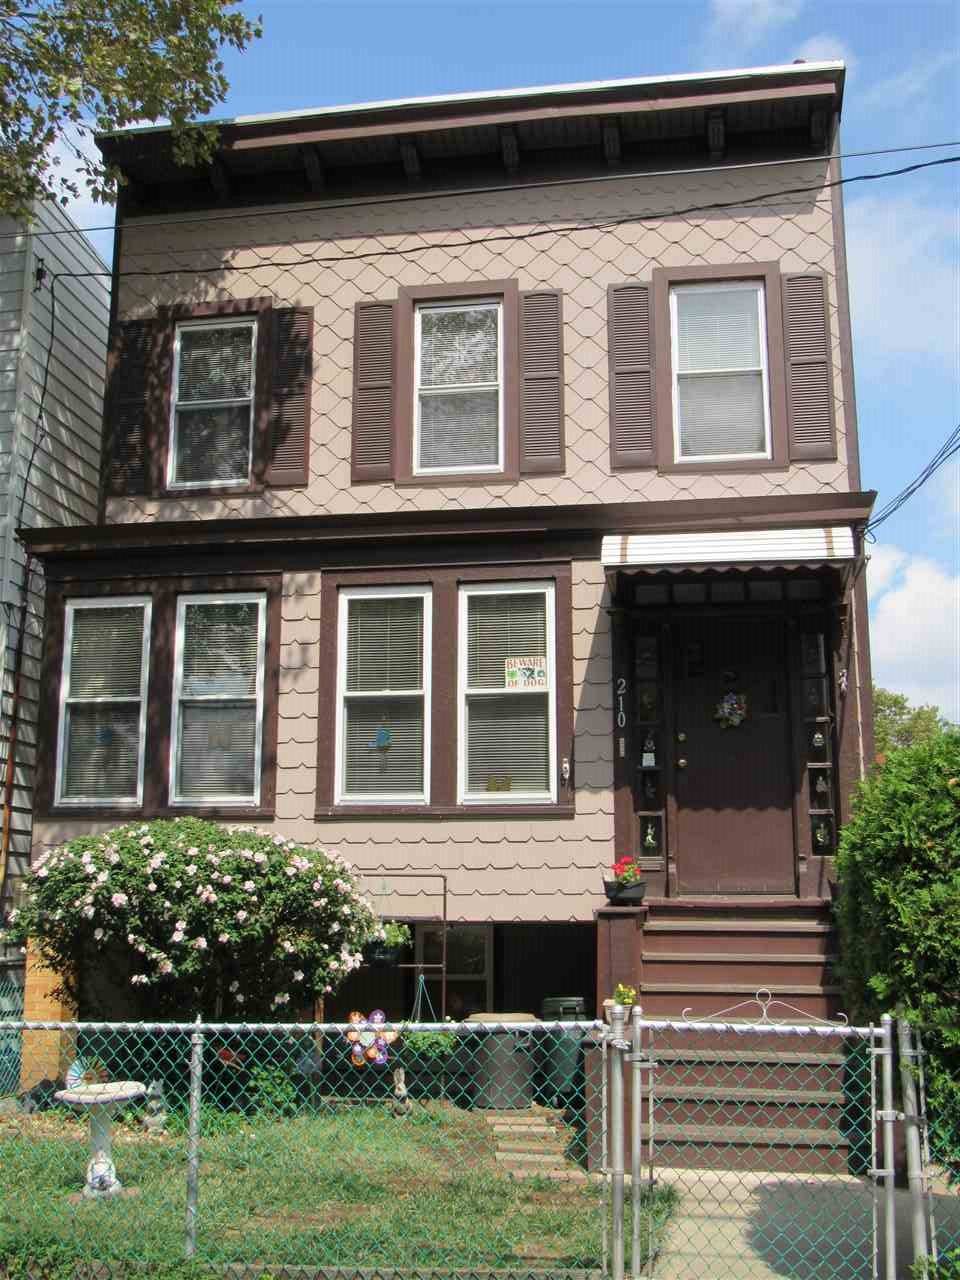 Amazing opportunity in the heights - Multi-Family New Jersey